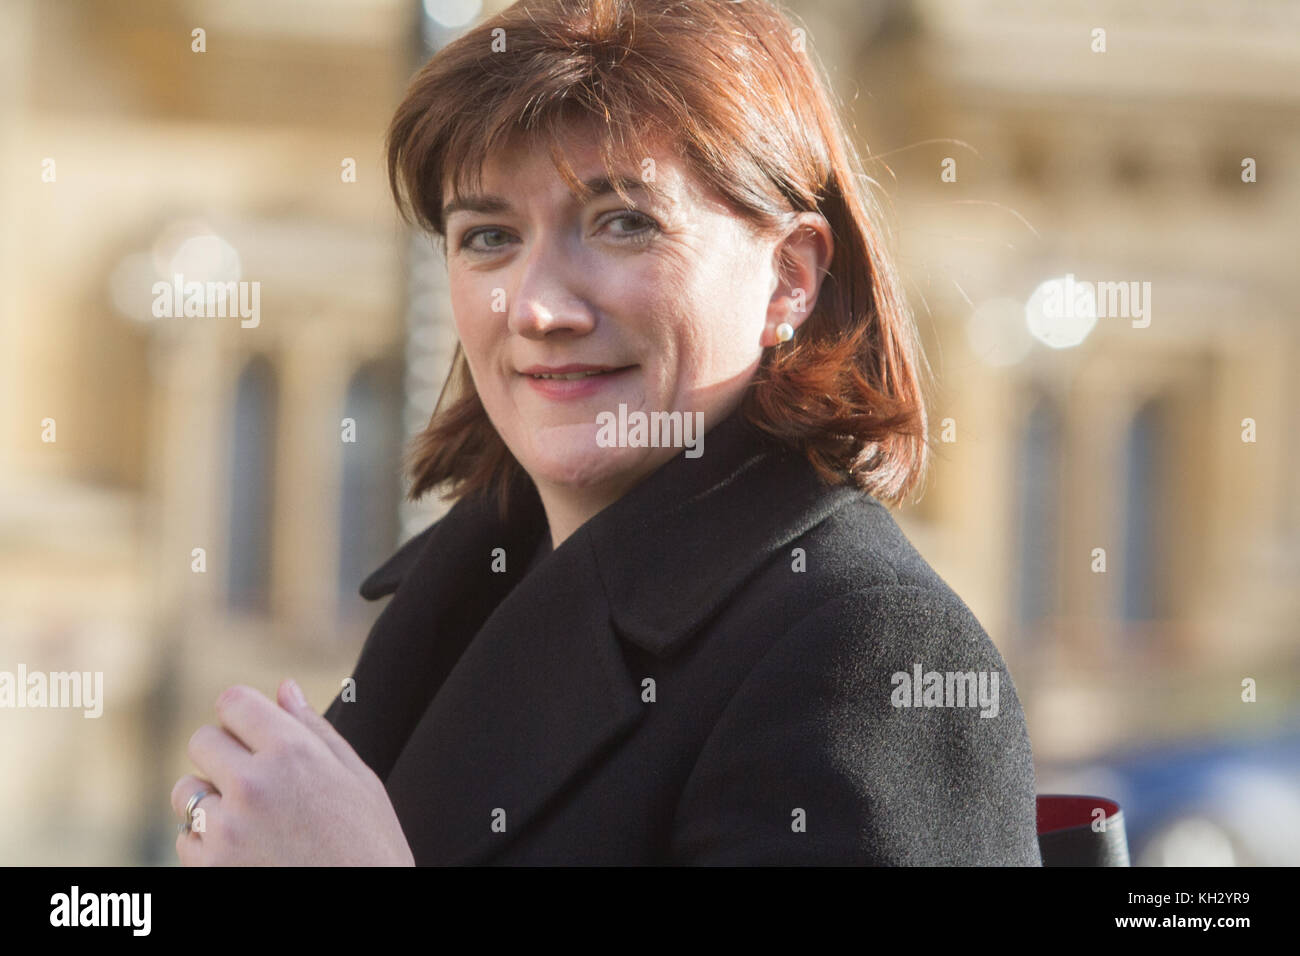 London, UK. 13th Nov, 2017.British Conservative Politician Nicky Morgan a Remain supporter  is seen in Westminster. Nicky Morgan is Member of Parliament for Loughborough and has served as Education Secretary under Prime Minister David Cameron and Minister for Women Equalities   Credit: amer ghazzal/Alamy Live News Stock Photo